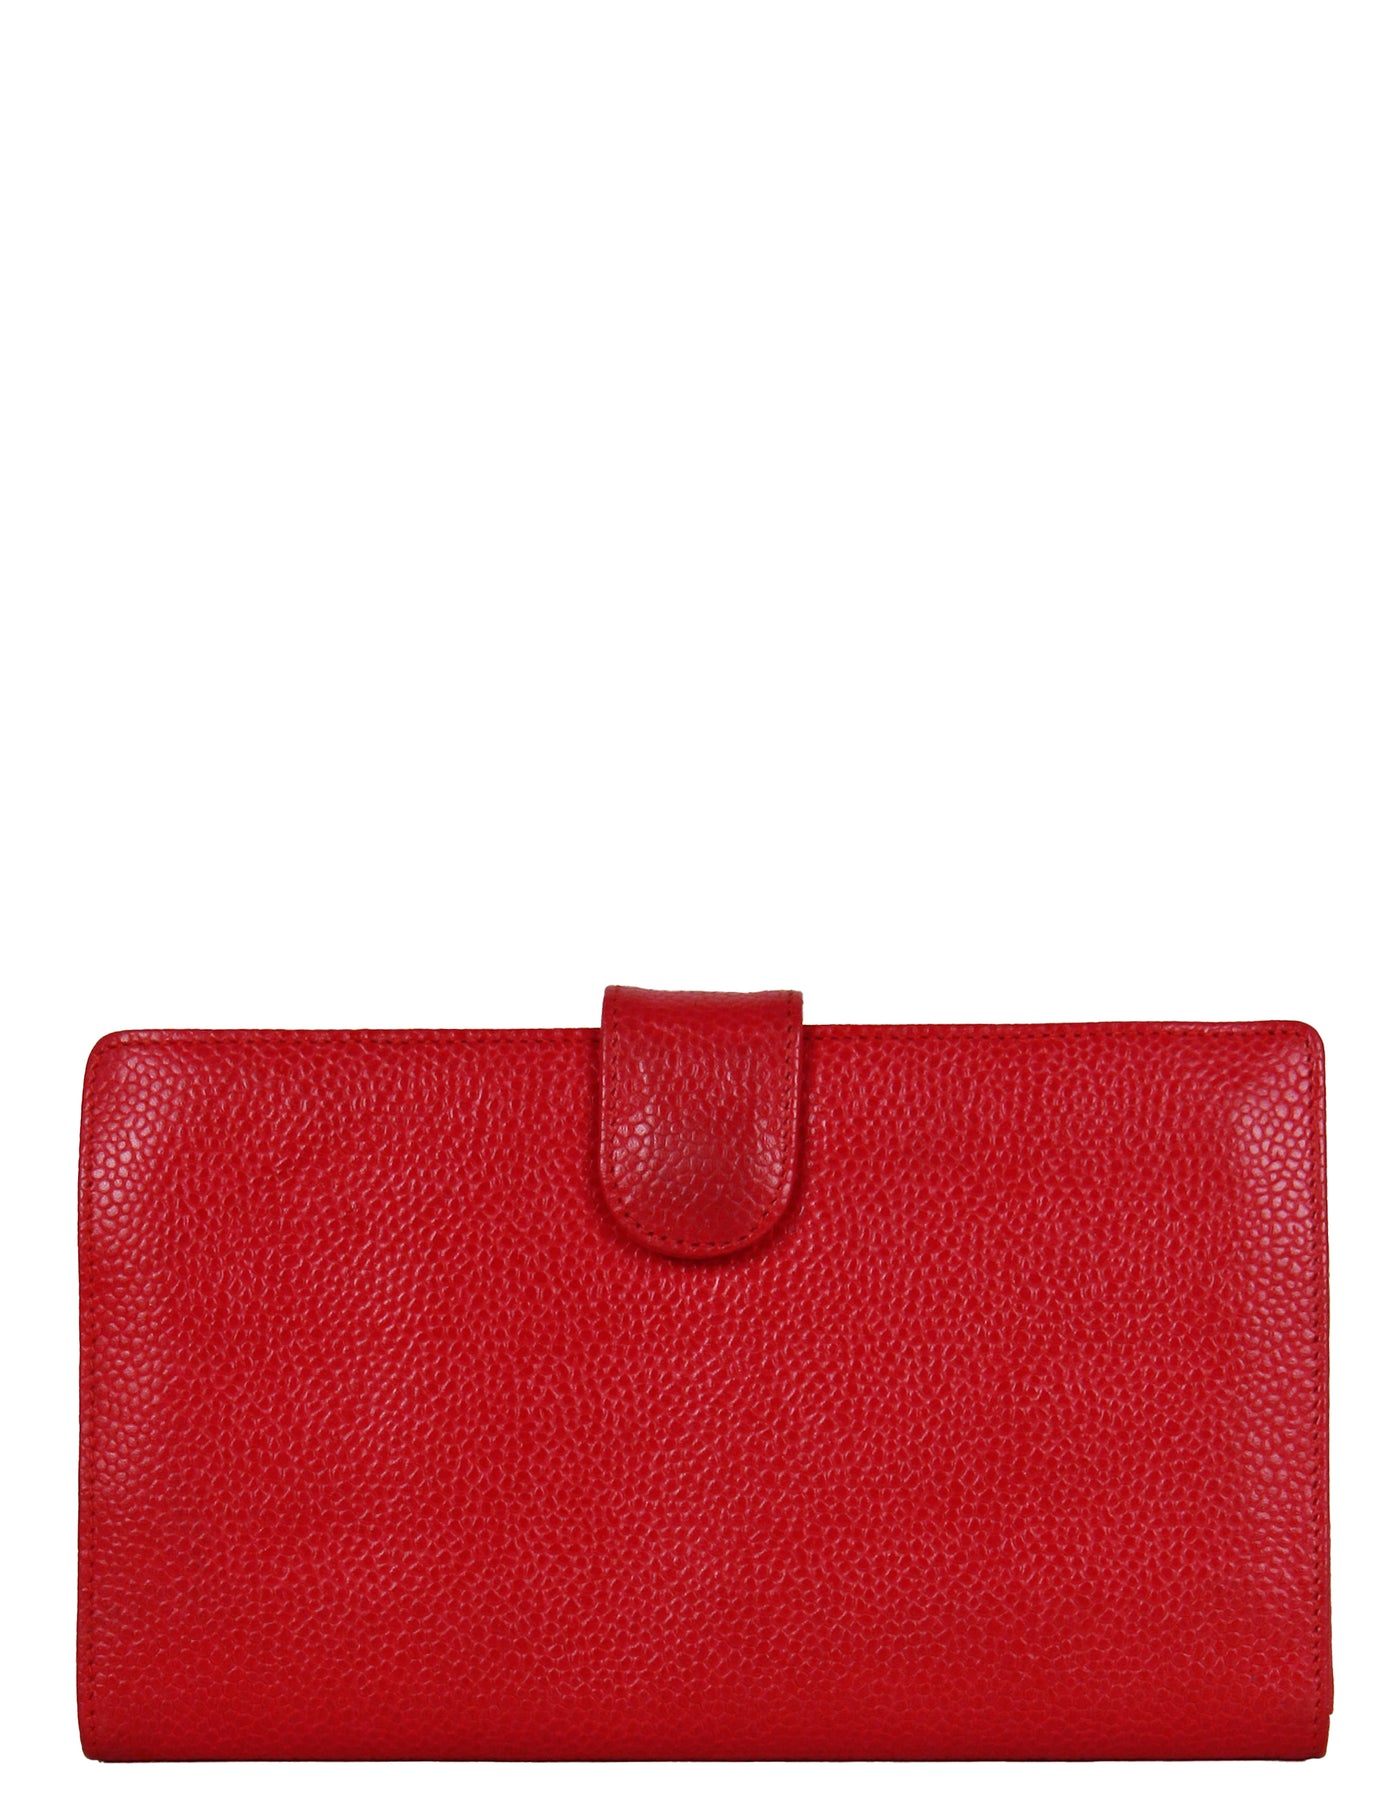 Chanel Vintage Red Caviar Leather Timeless CC Long Wallet – ASC Resale